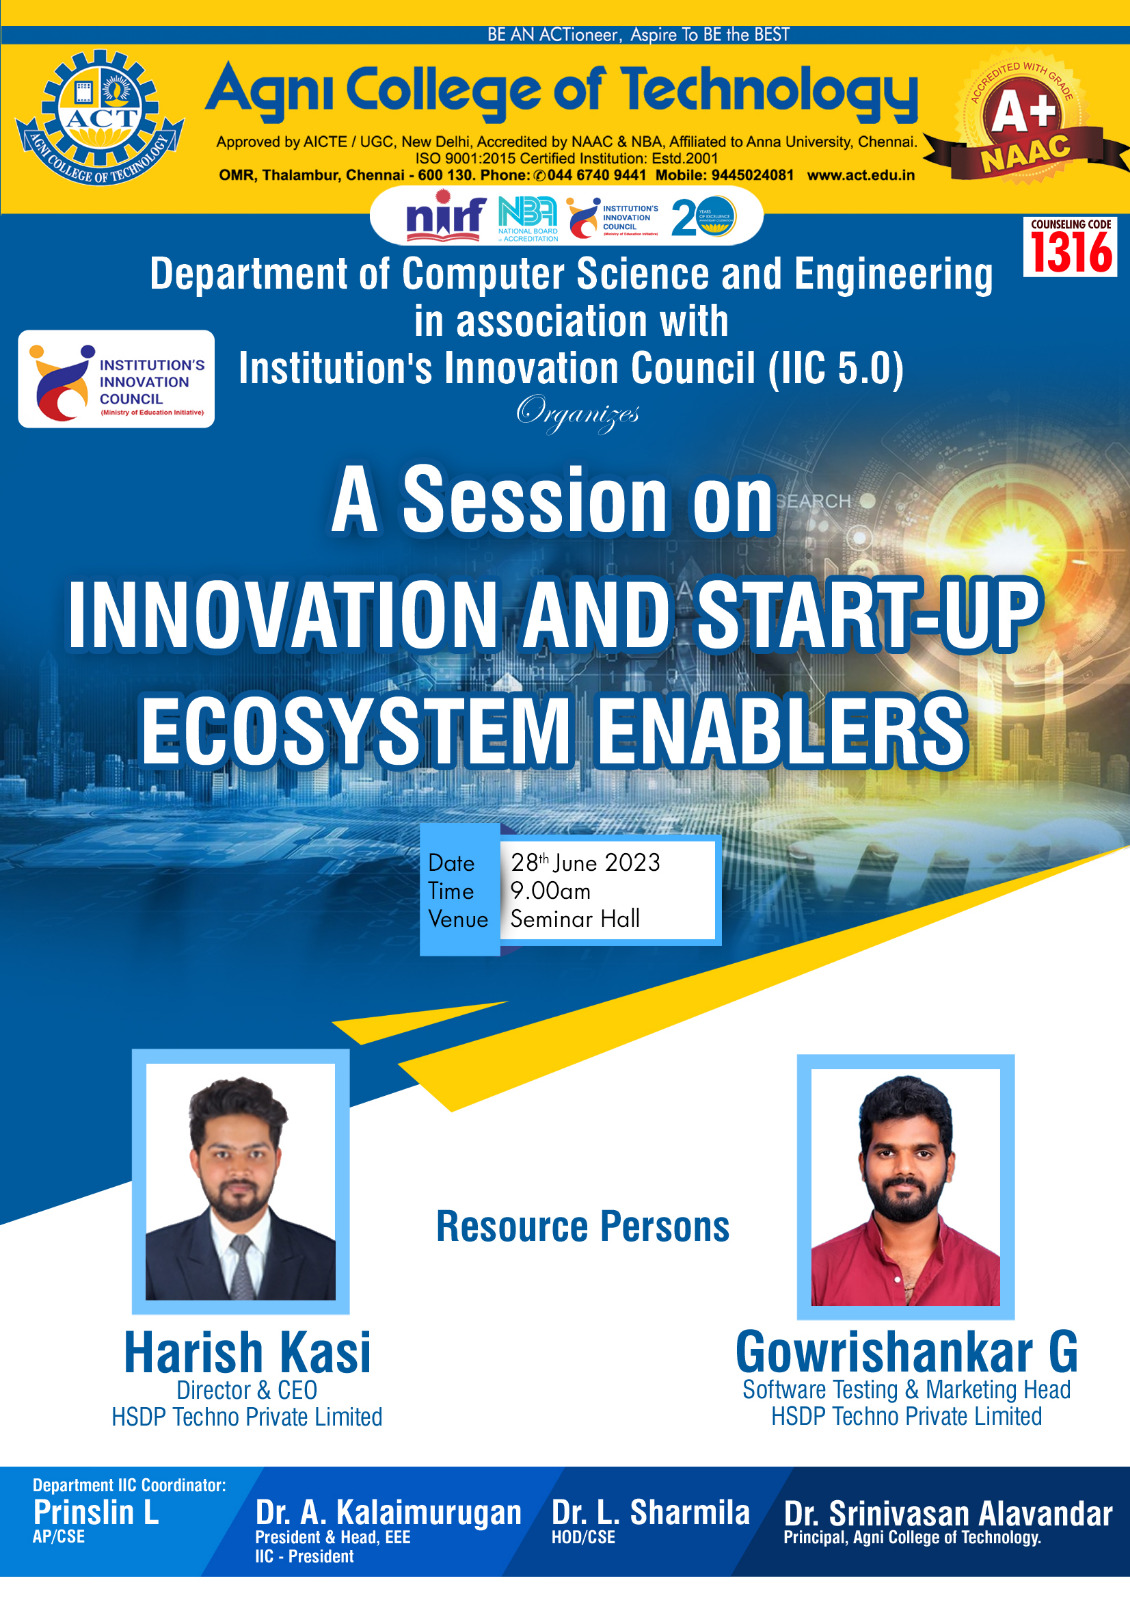 A Session on Innovation and Start-Up Ecosystem Enablers